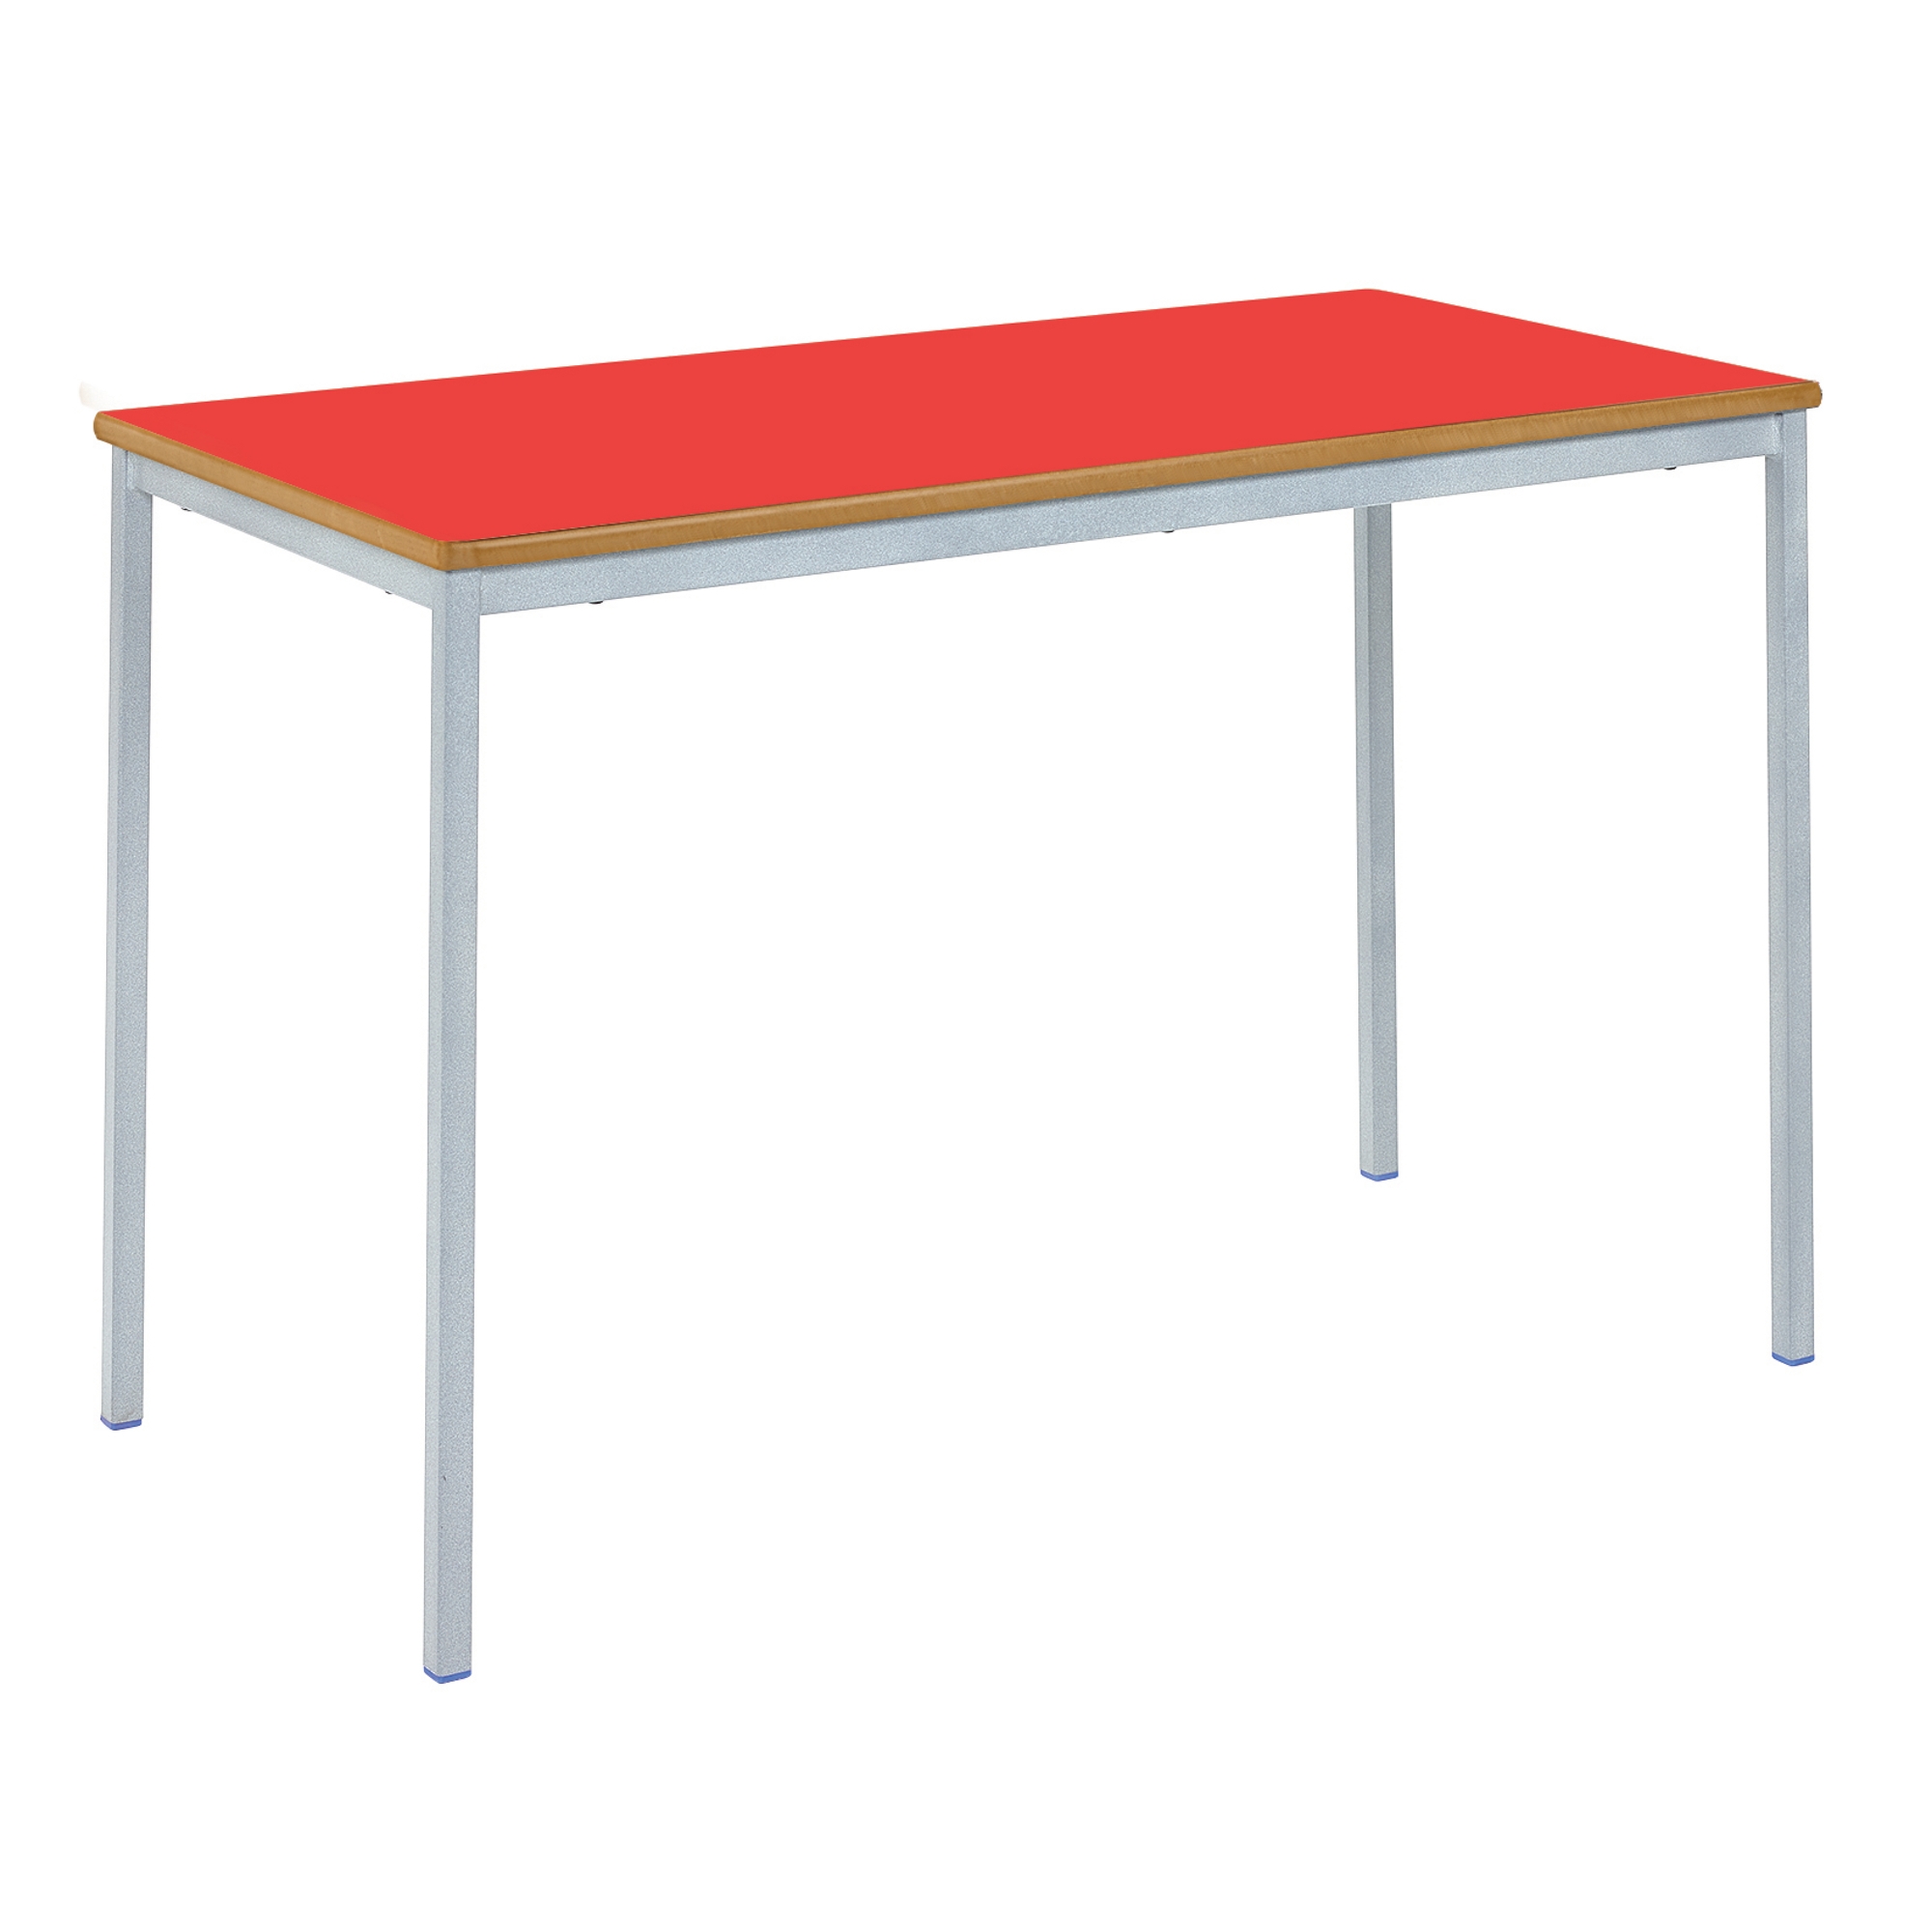 Classmates Rectangular Fully Welded Classroom Table - 1200 x 600 x 530mm - Red